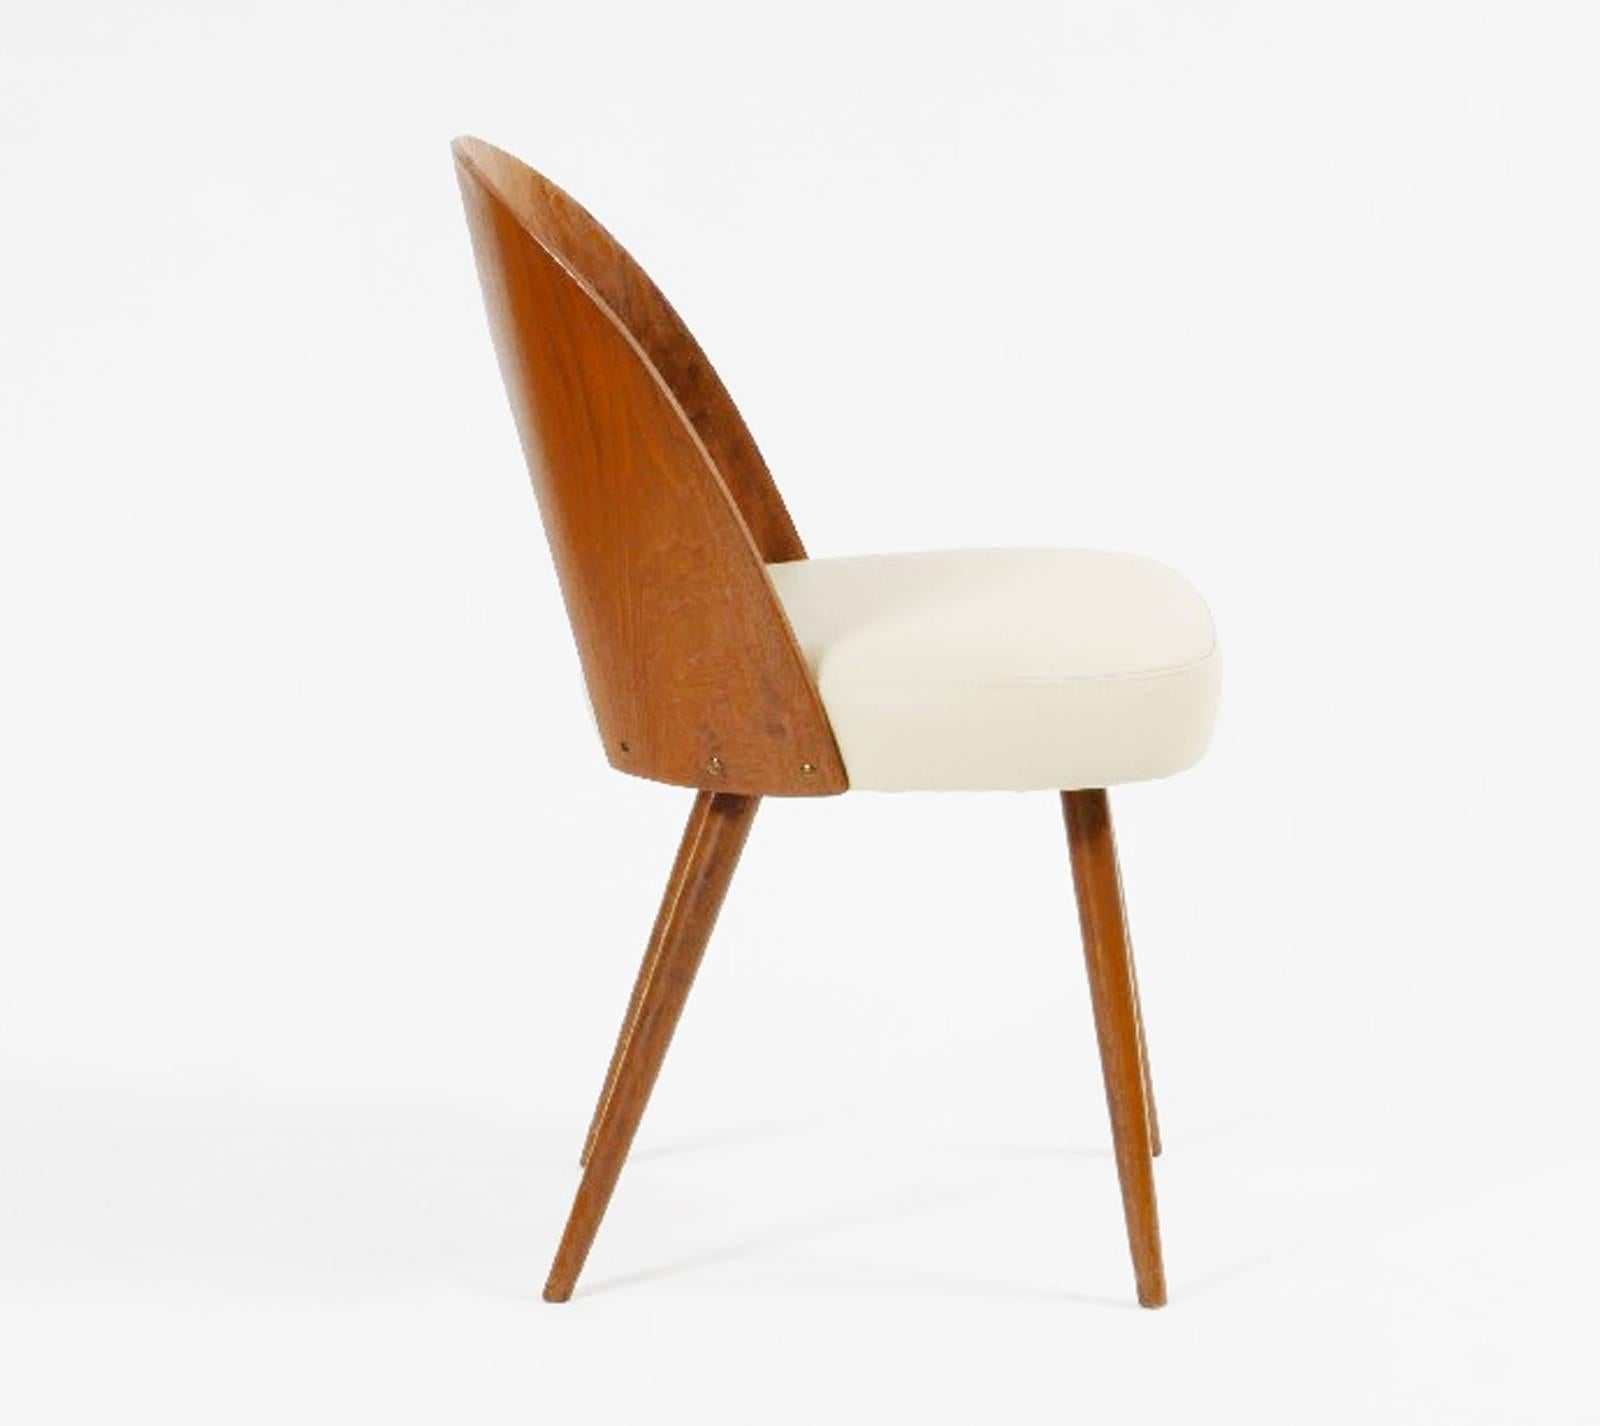 Walnut wood with walnut veneer, upholstered with leather. Designed by Antonin Suman in the 1960s for Tatra in Czechoslovakia. Final color of the leather and the wood can be customized
Up to 24 pieces available, delivery 3-4 weeks.
         